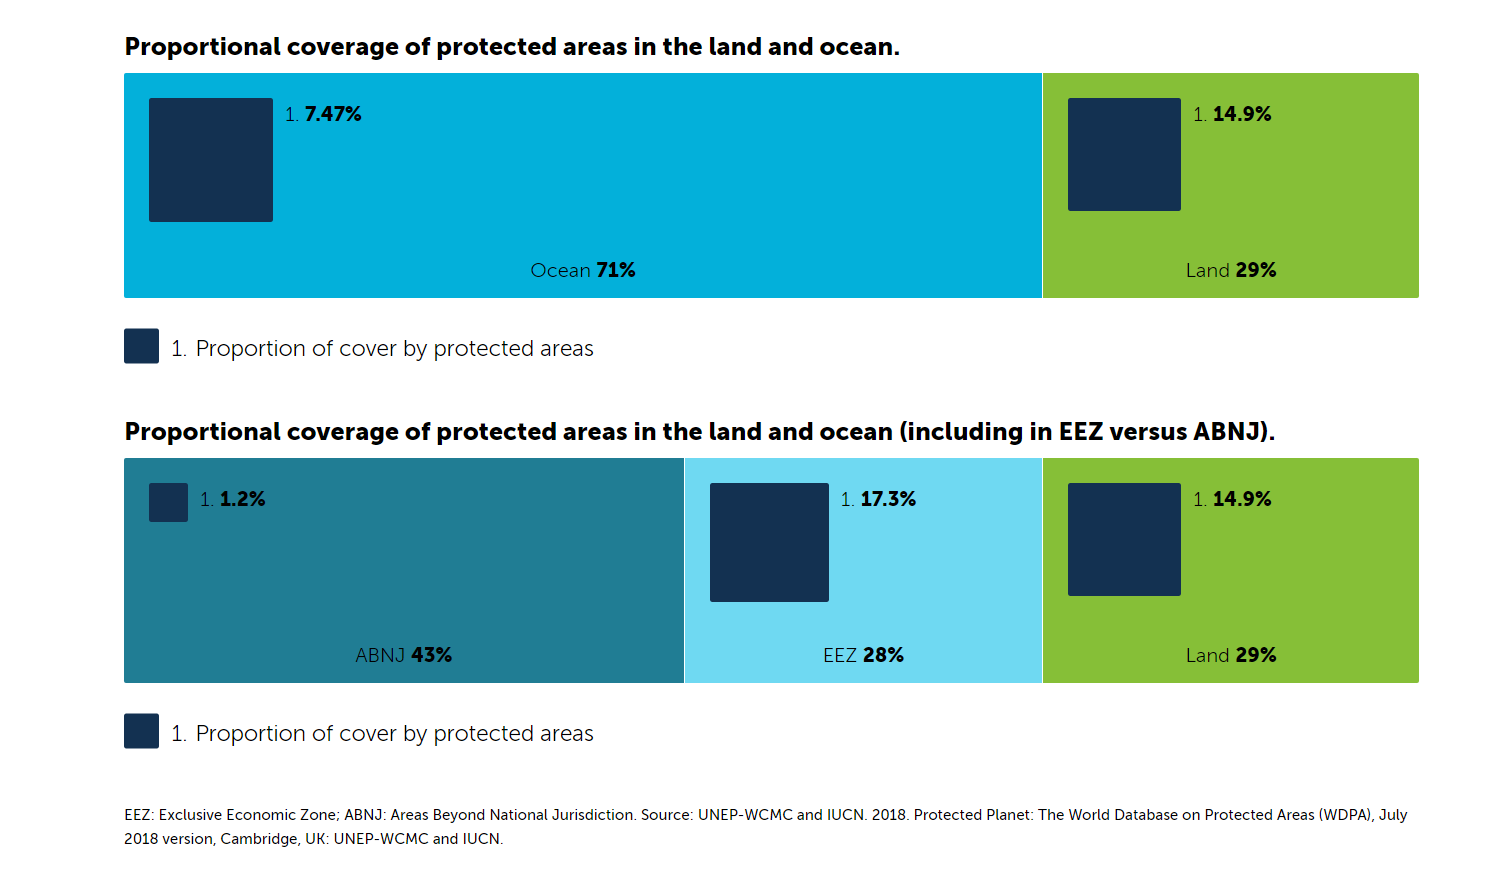 Proportional coverage of protected areas in the land and ocean